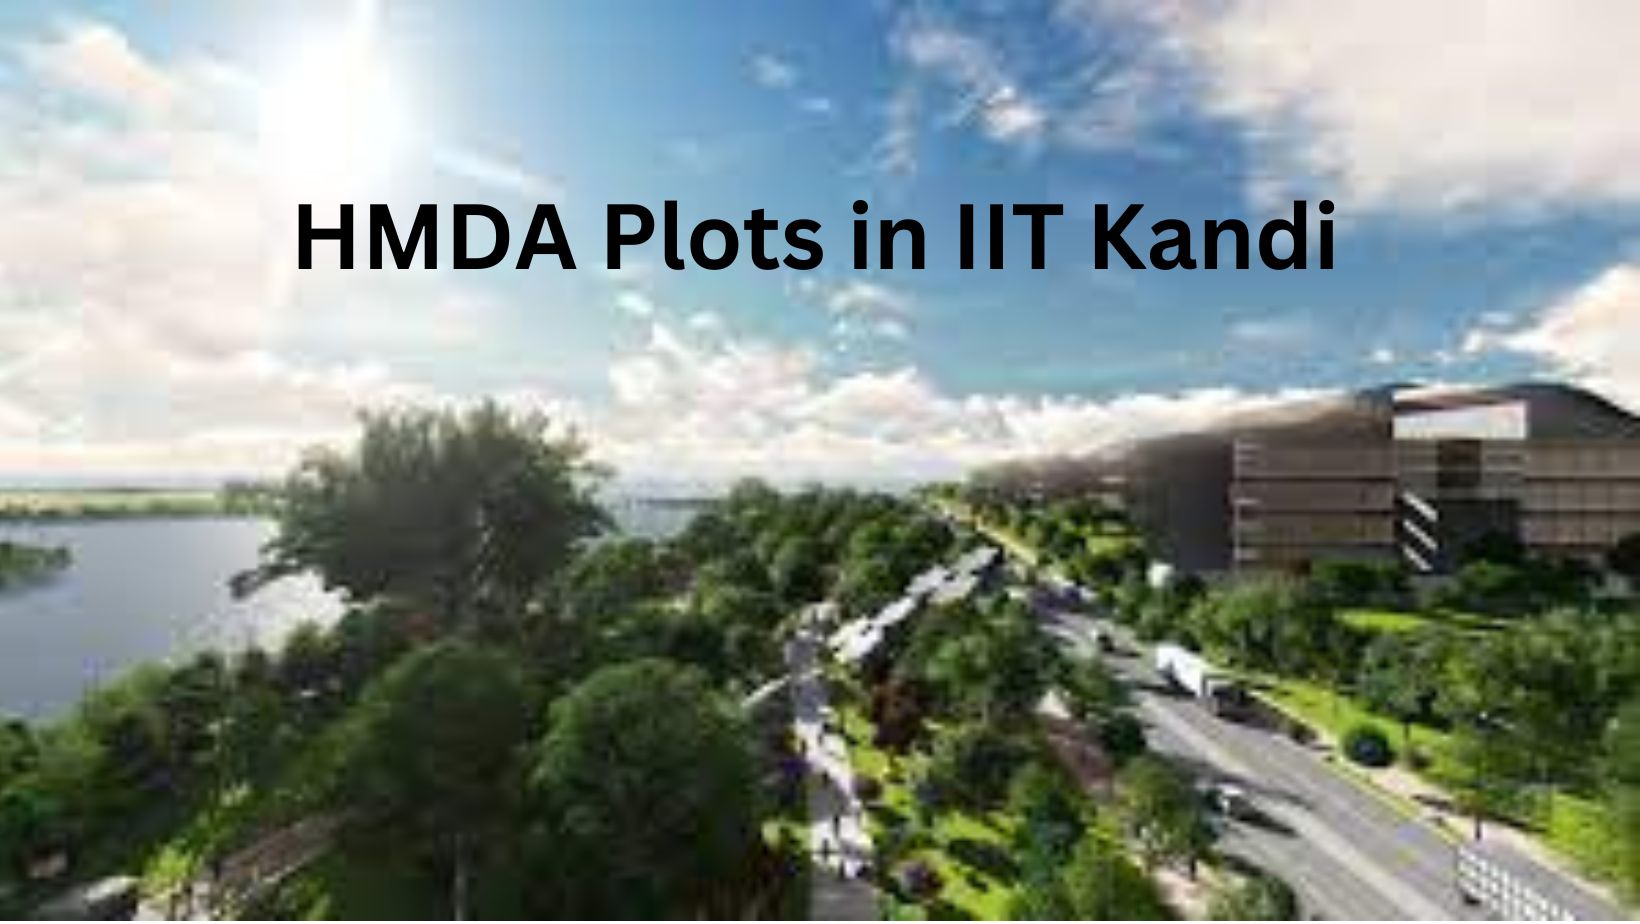 Where Can I Find HMDA Residential Plots in Hyderabad